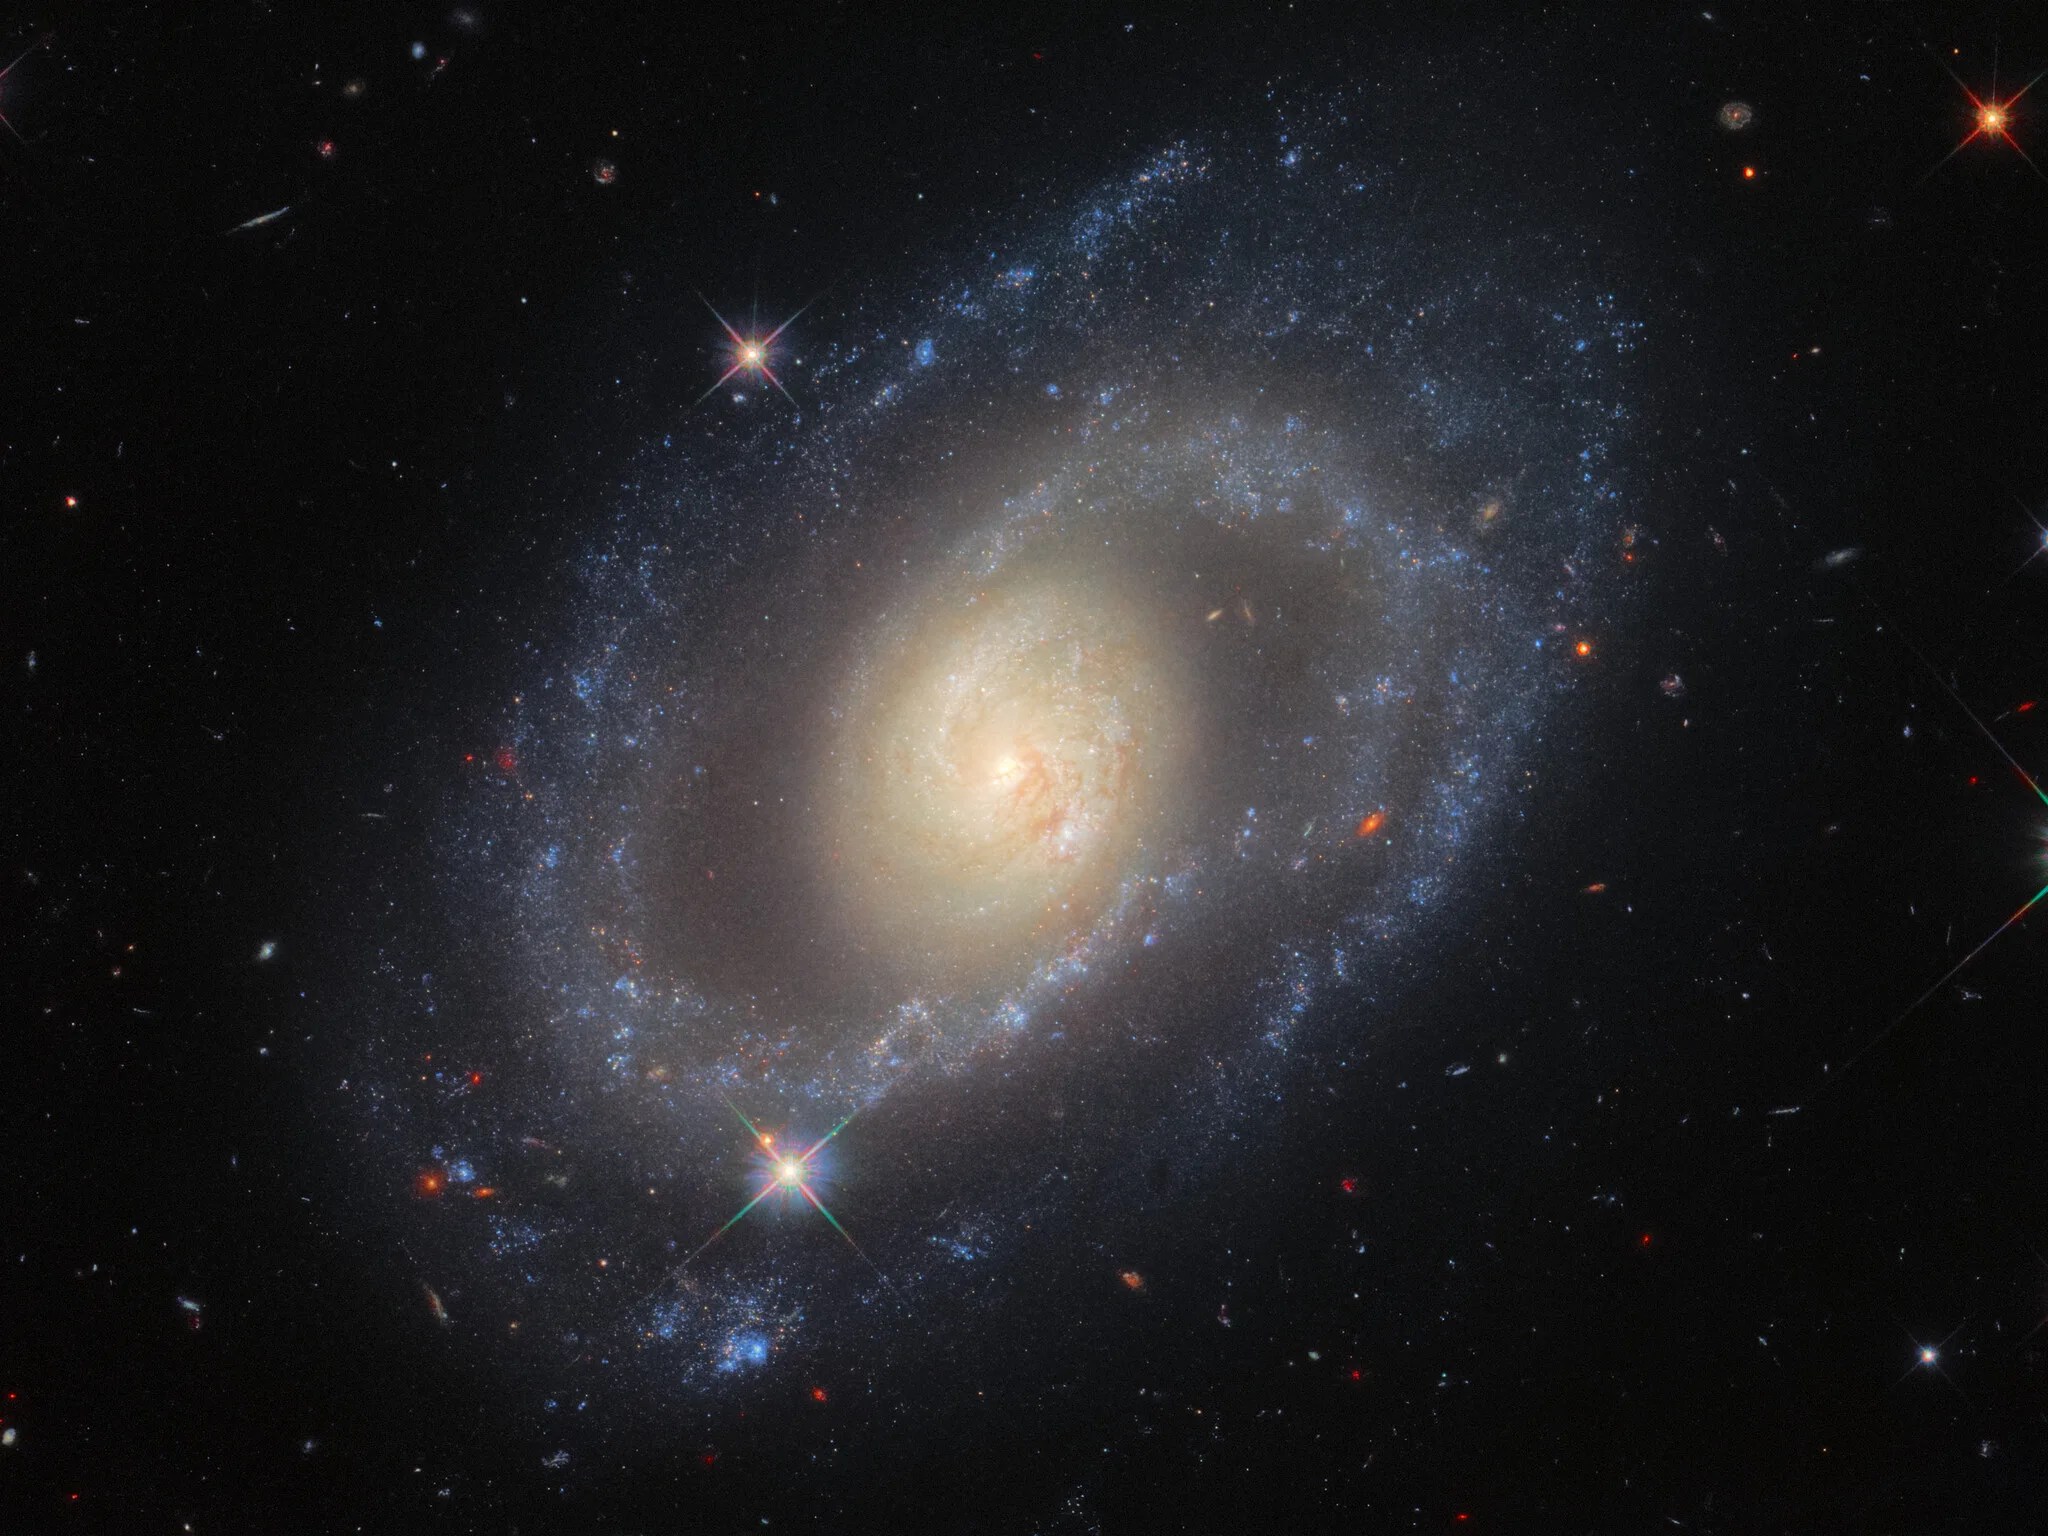 Hubble image of spiral galaxy mrk 1337. bright central bulge with two prominent spiral arms emerging from it.